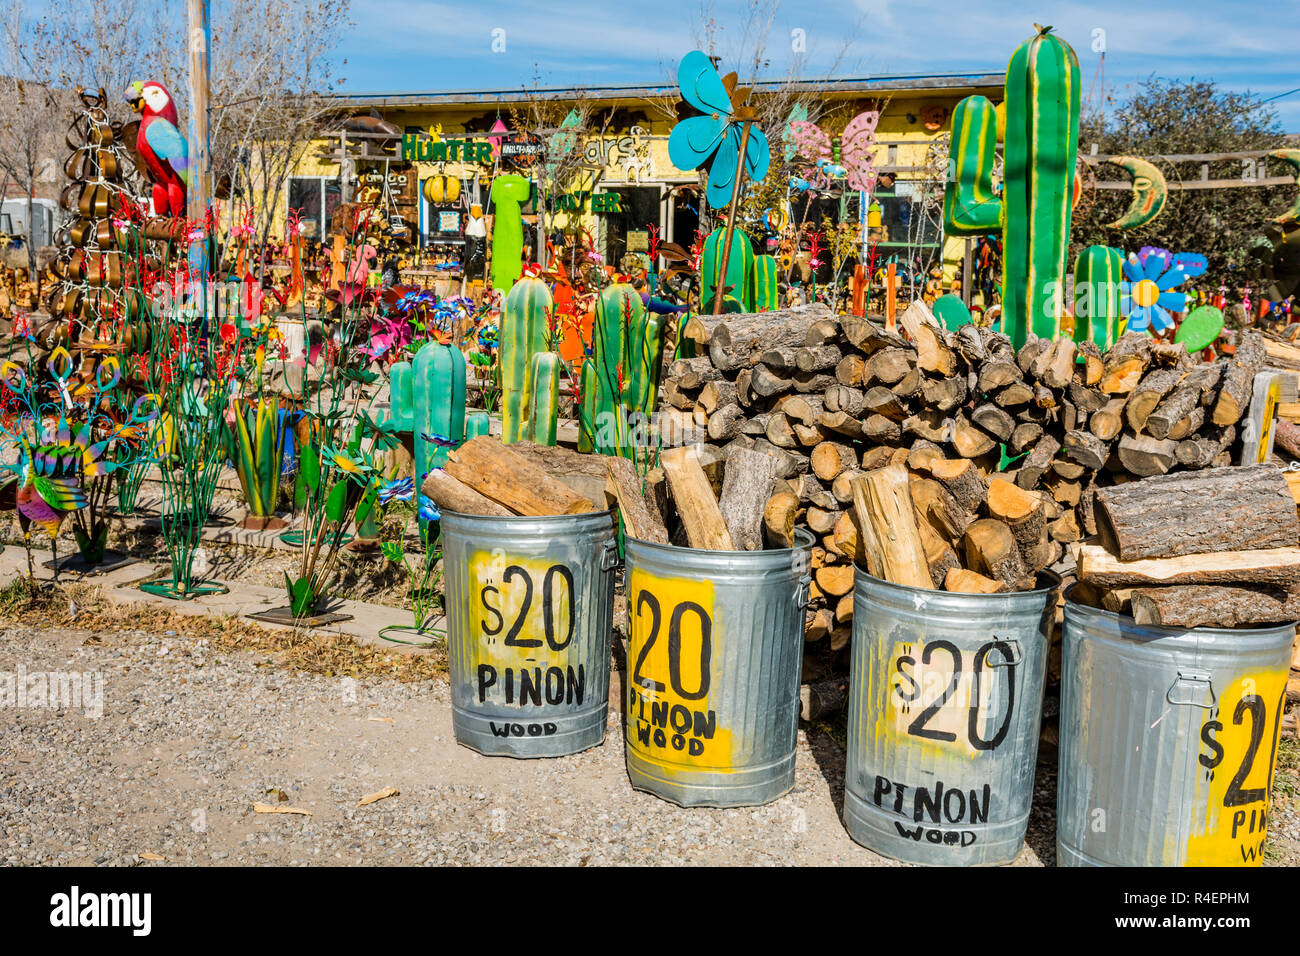 Ruidoso, New Mexico, USA, piñon wood, piñon firewood for sale at a shop selling colorful Mexican metal imports. Stock Photo